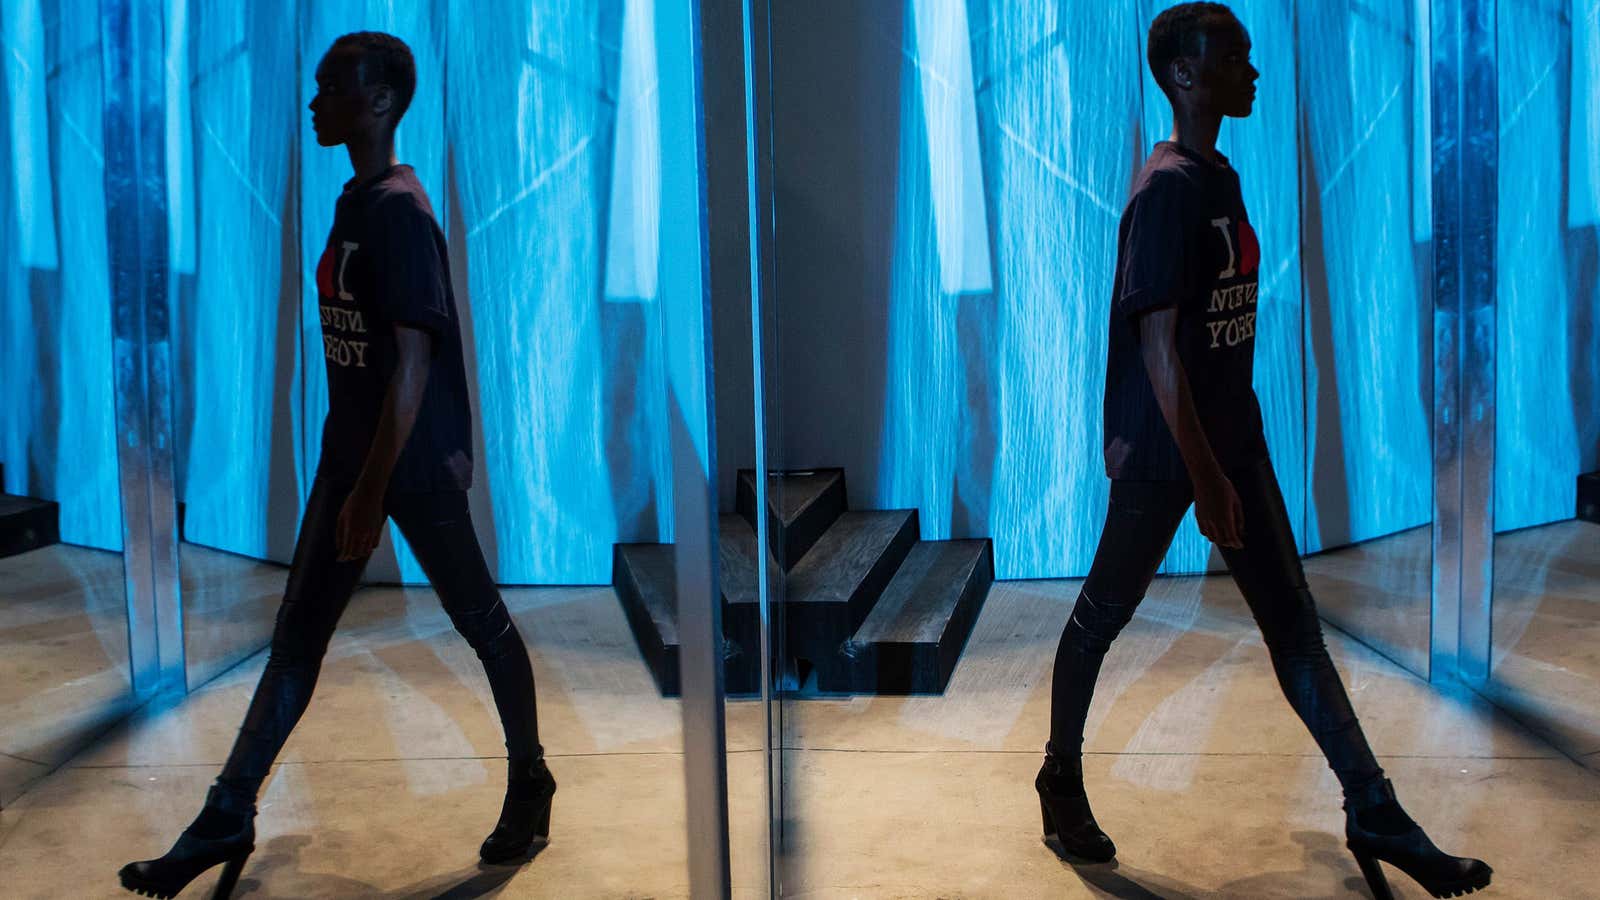 A model is seen reflected in a mirror during a fashion show rehearsal